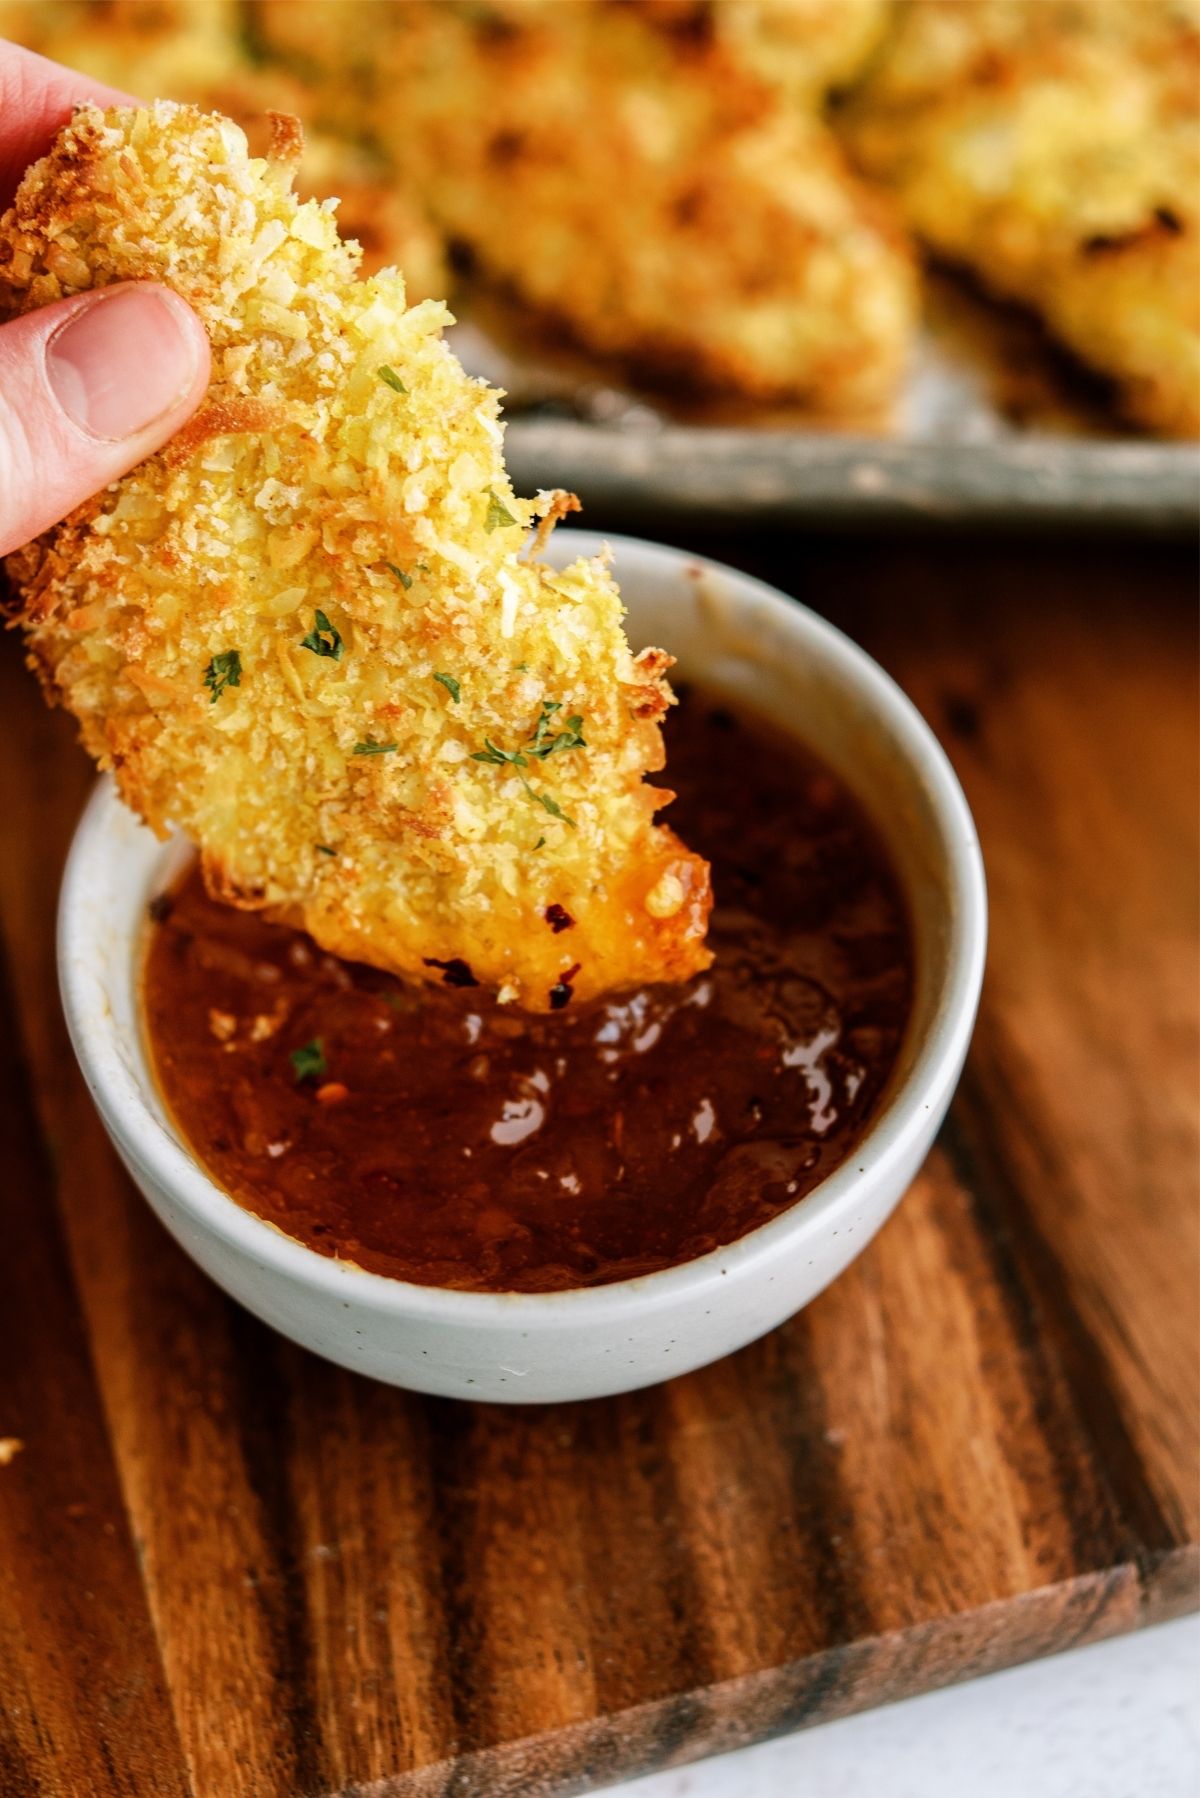 Baked Crispy Coconut Chicken Tender being dipped in sauce